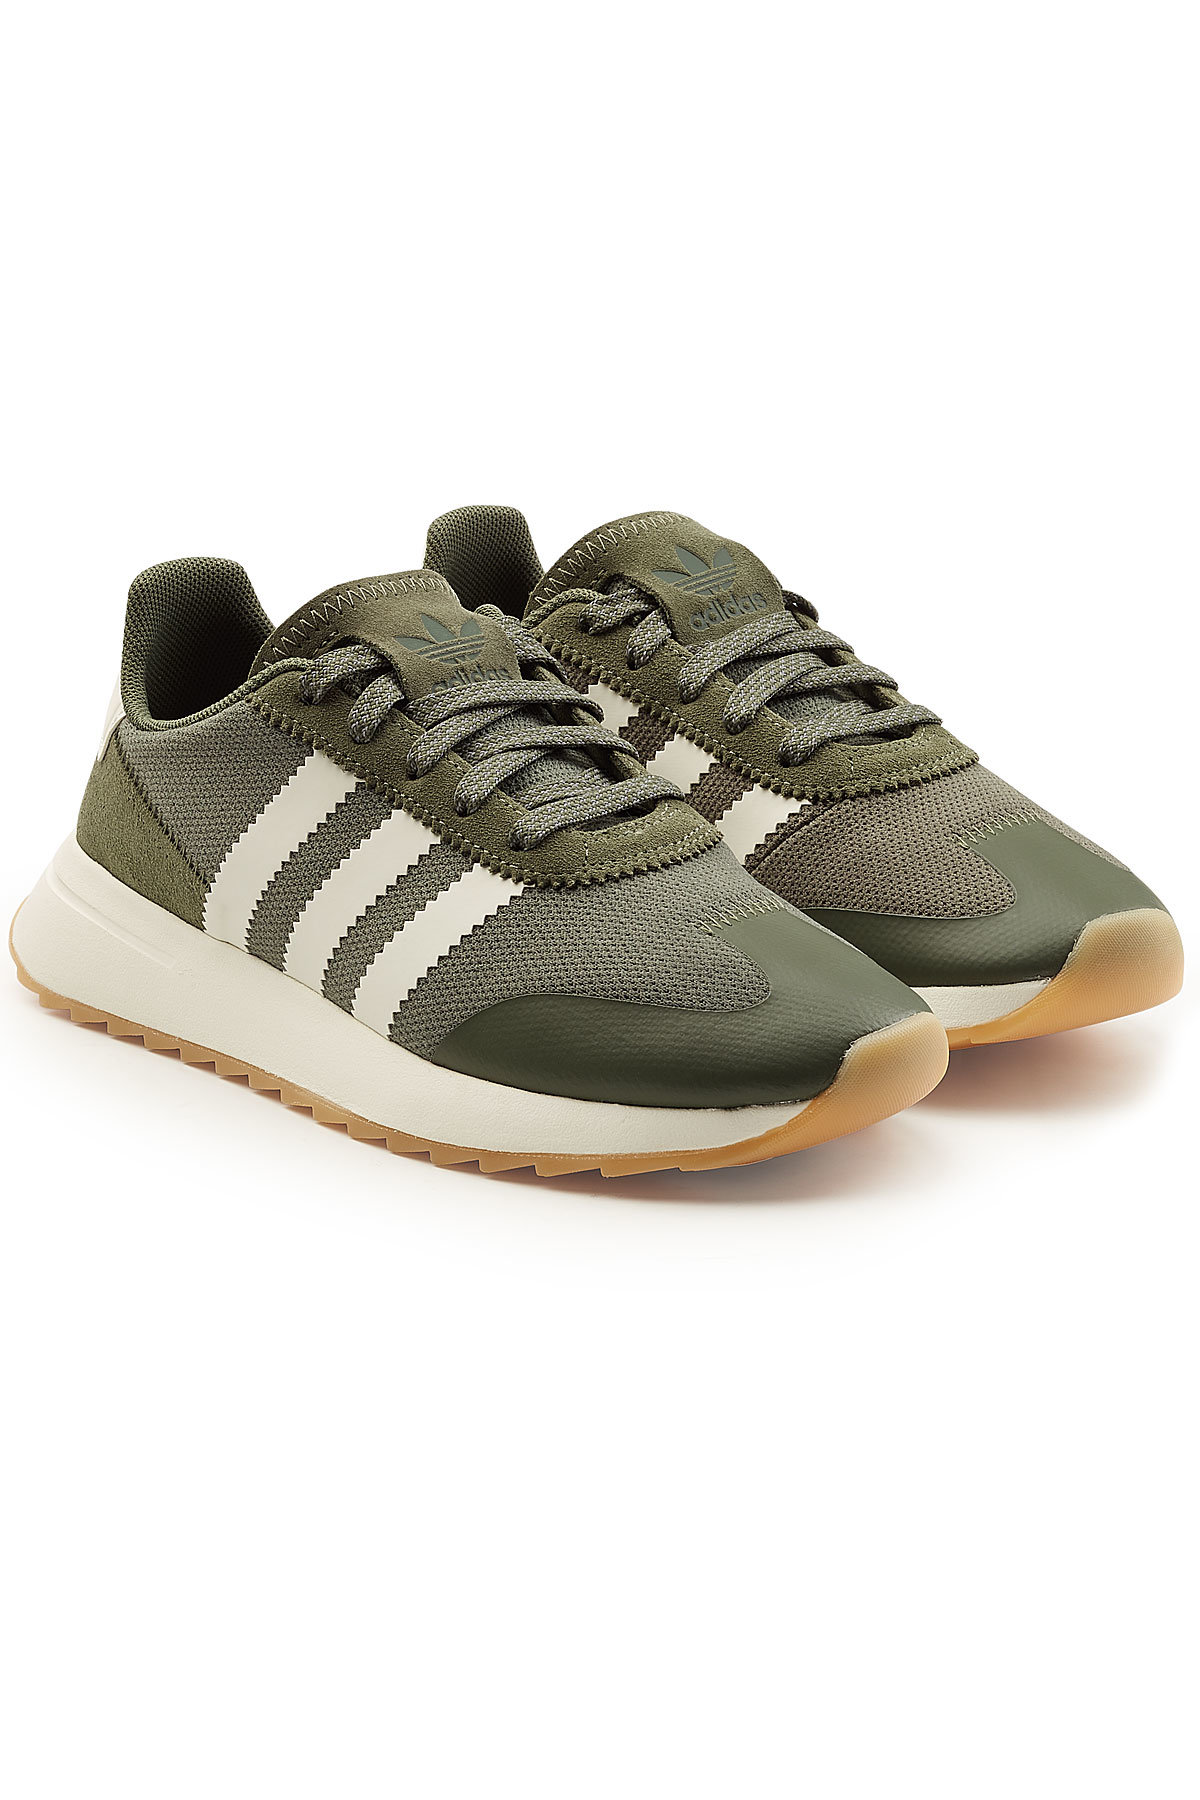 Adidas Originals - FLB Sneakers with Leather and Mesh